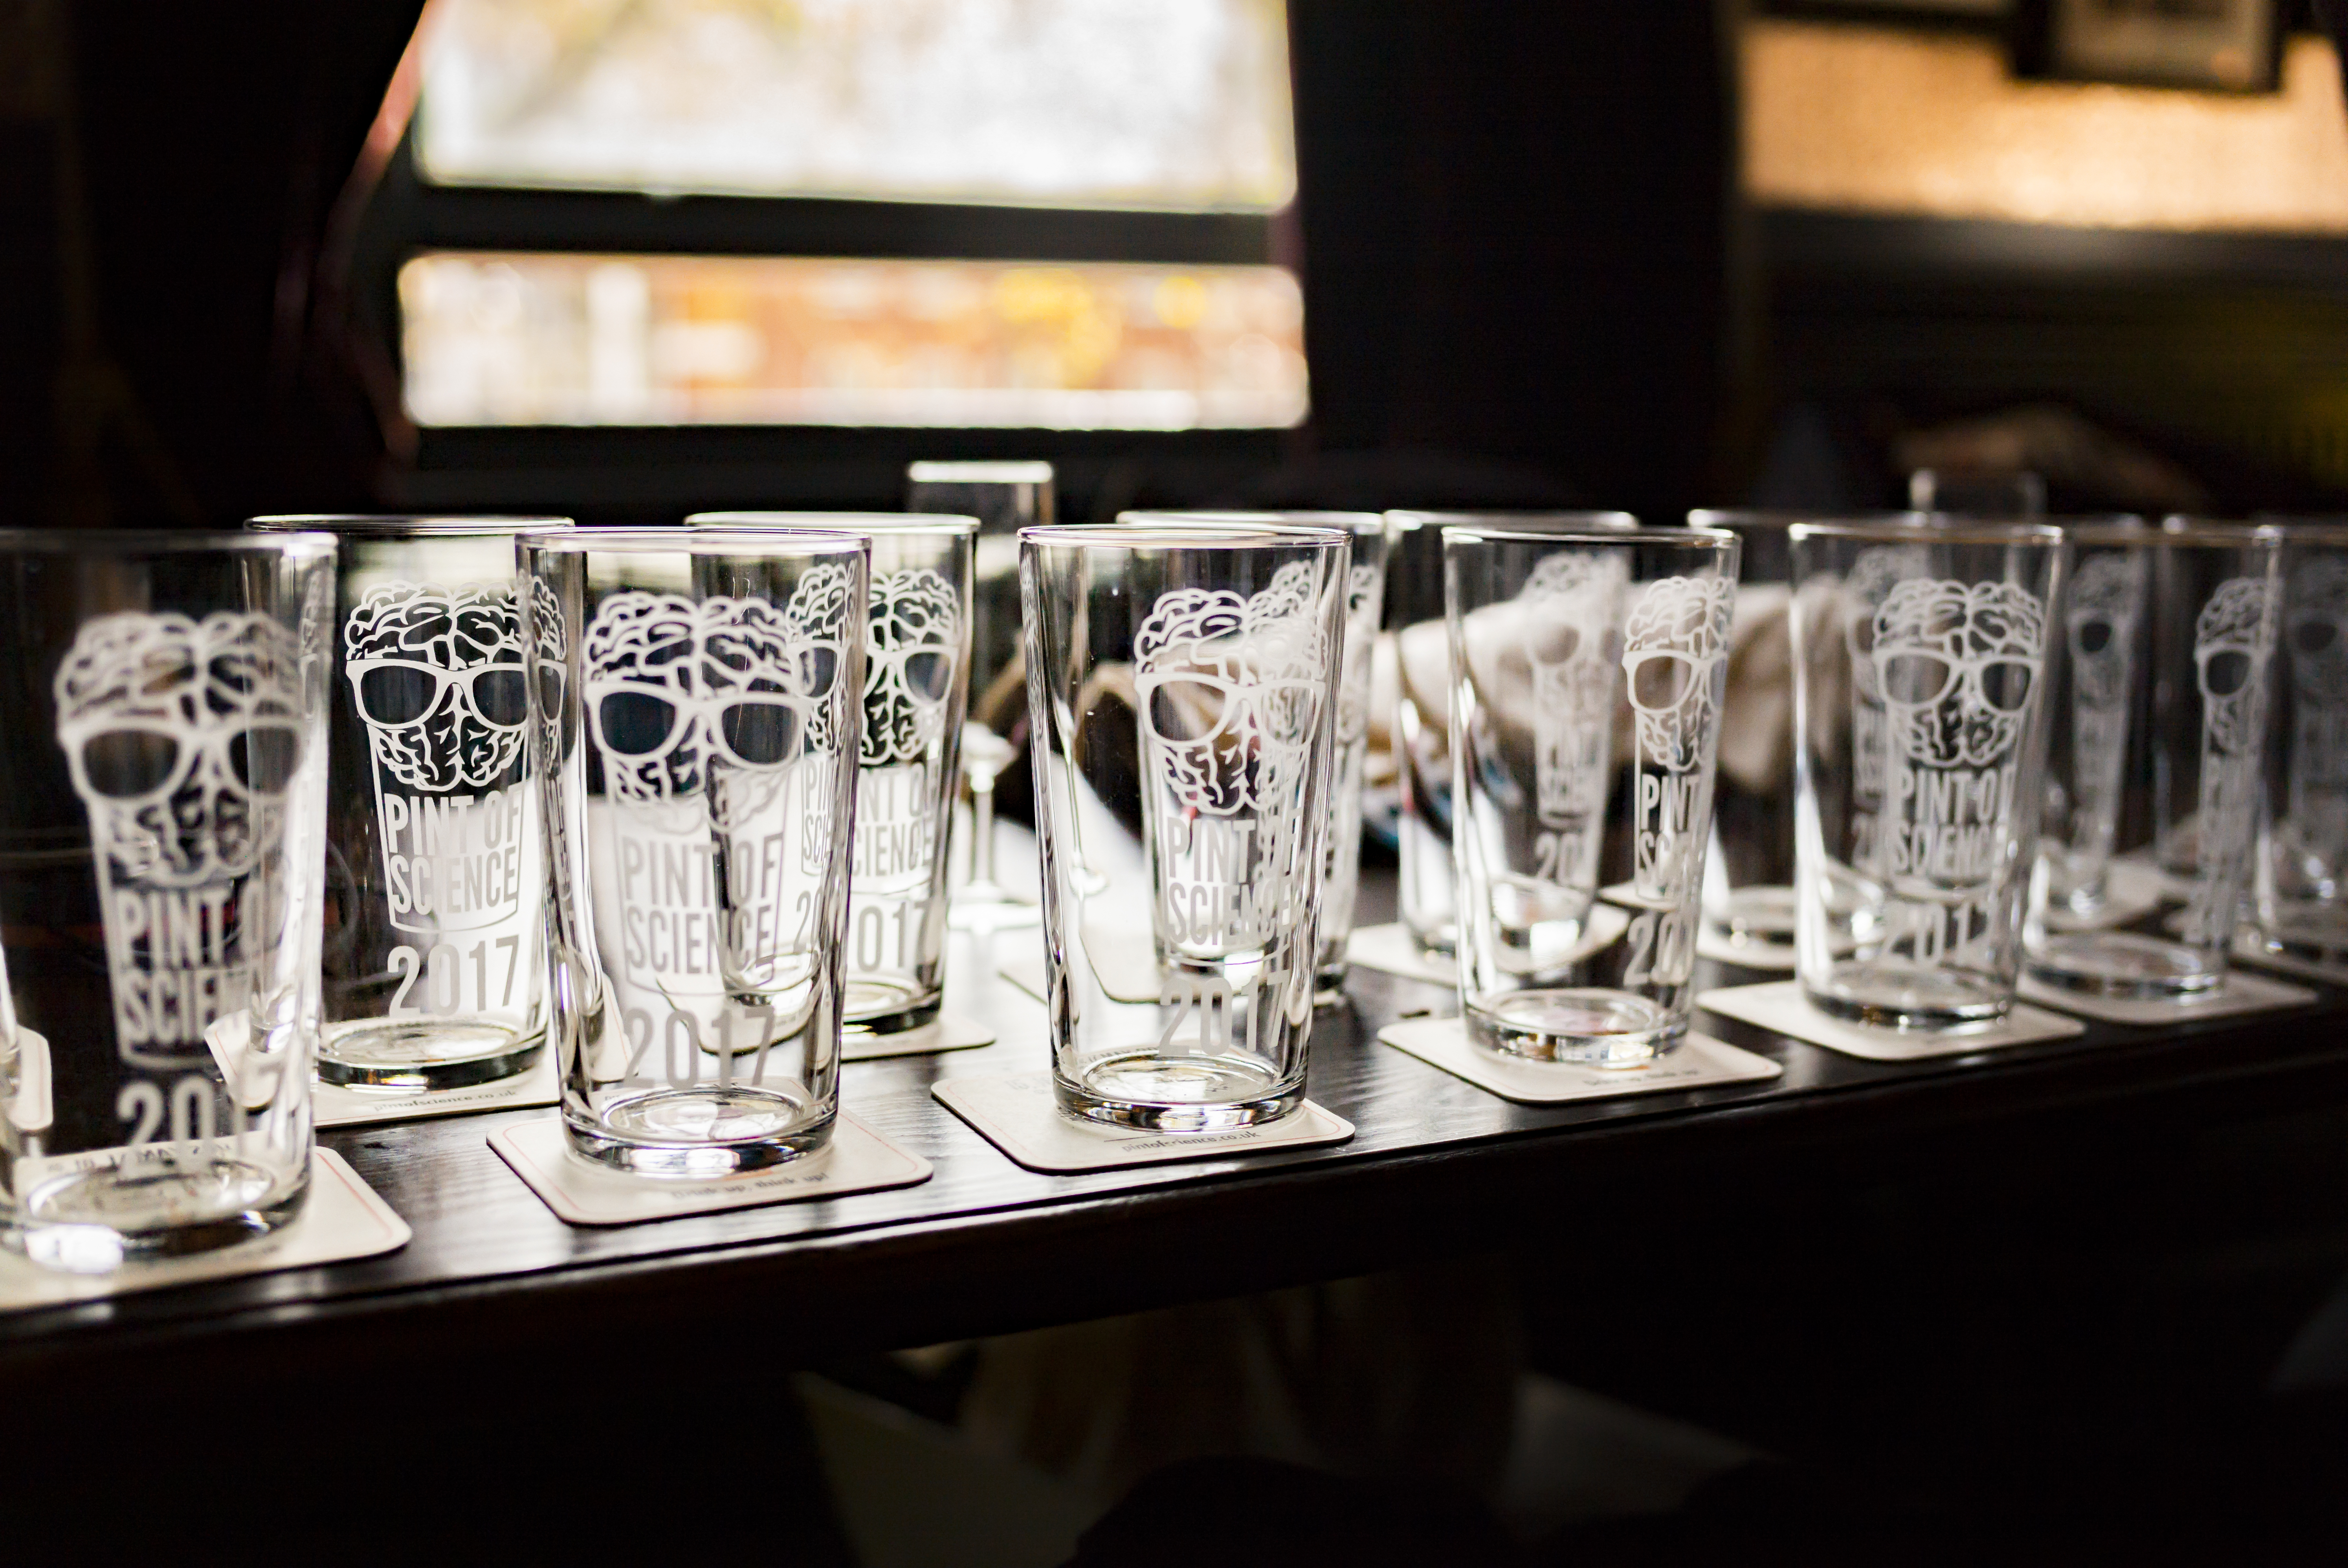 A bar full of pint glasses with the Pint of Science mascot on, which is a brain with glasses in a pint glass. 